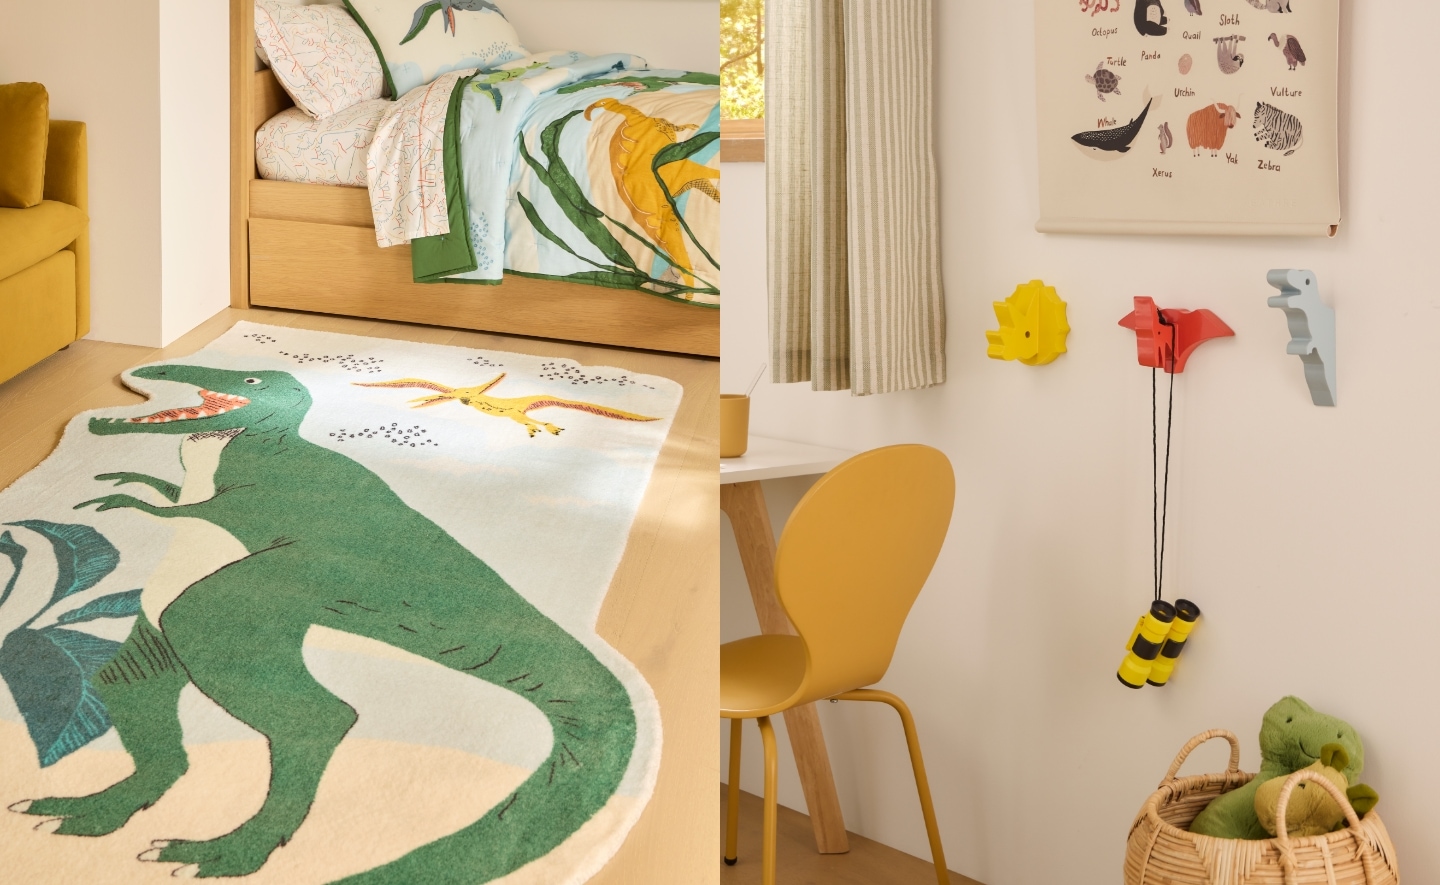 National Geographic x west elm kids